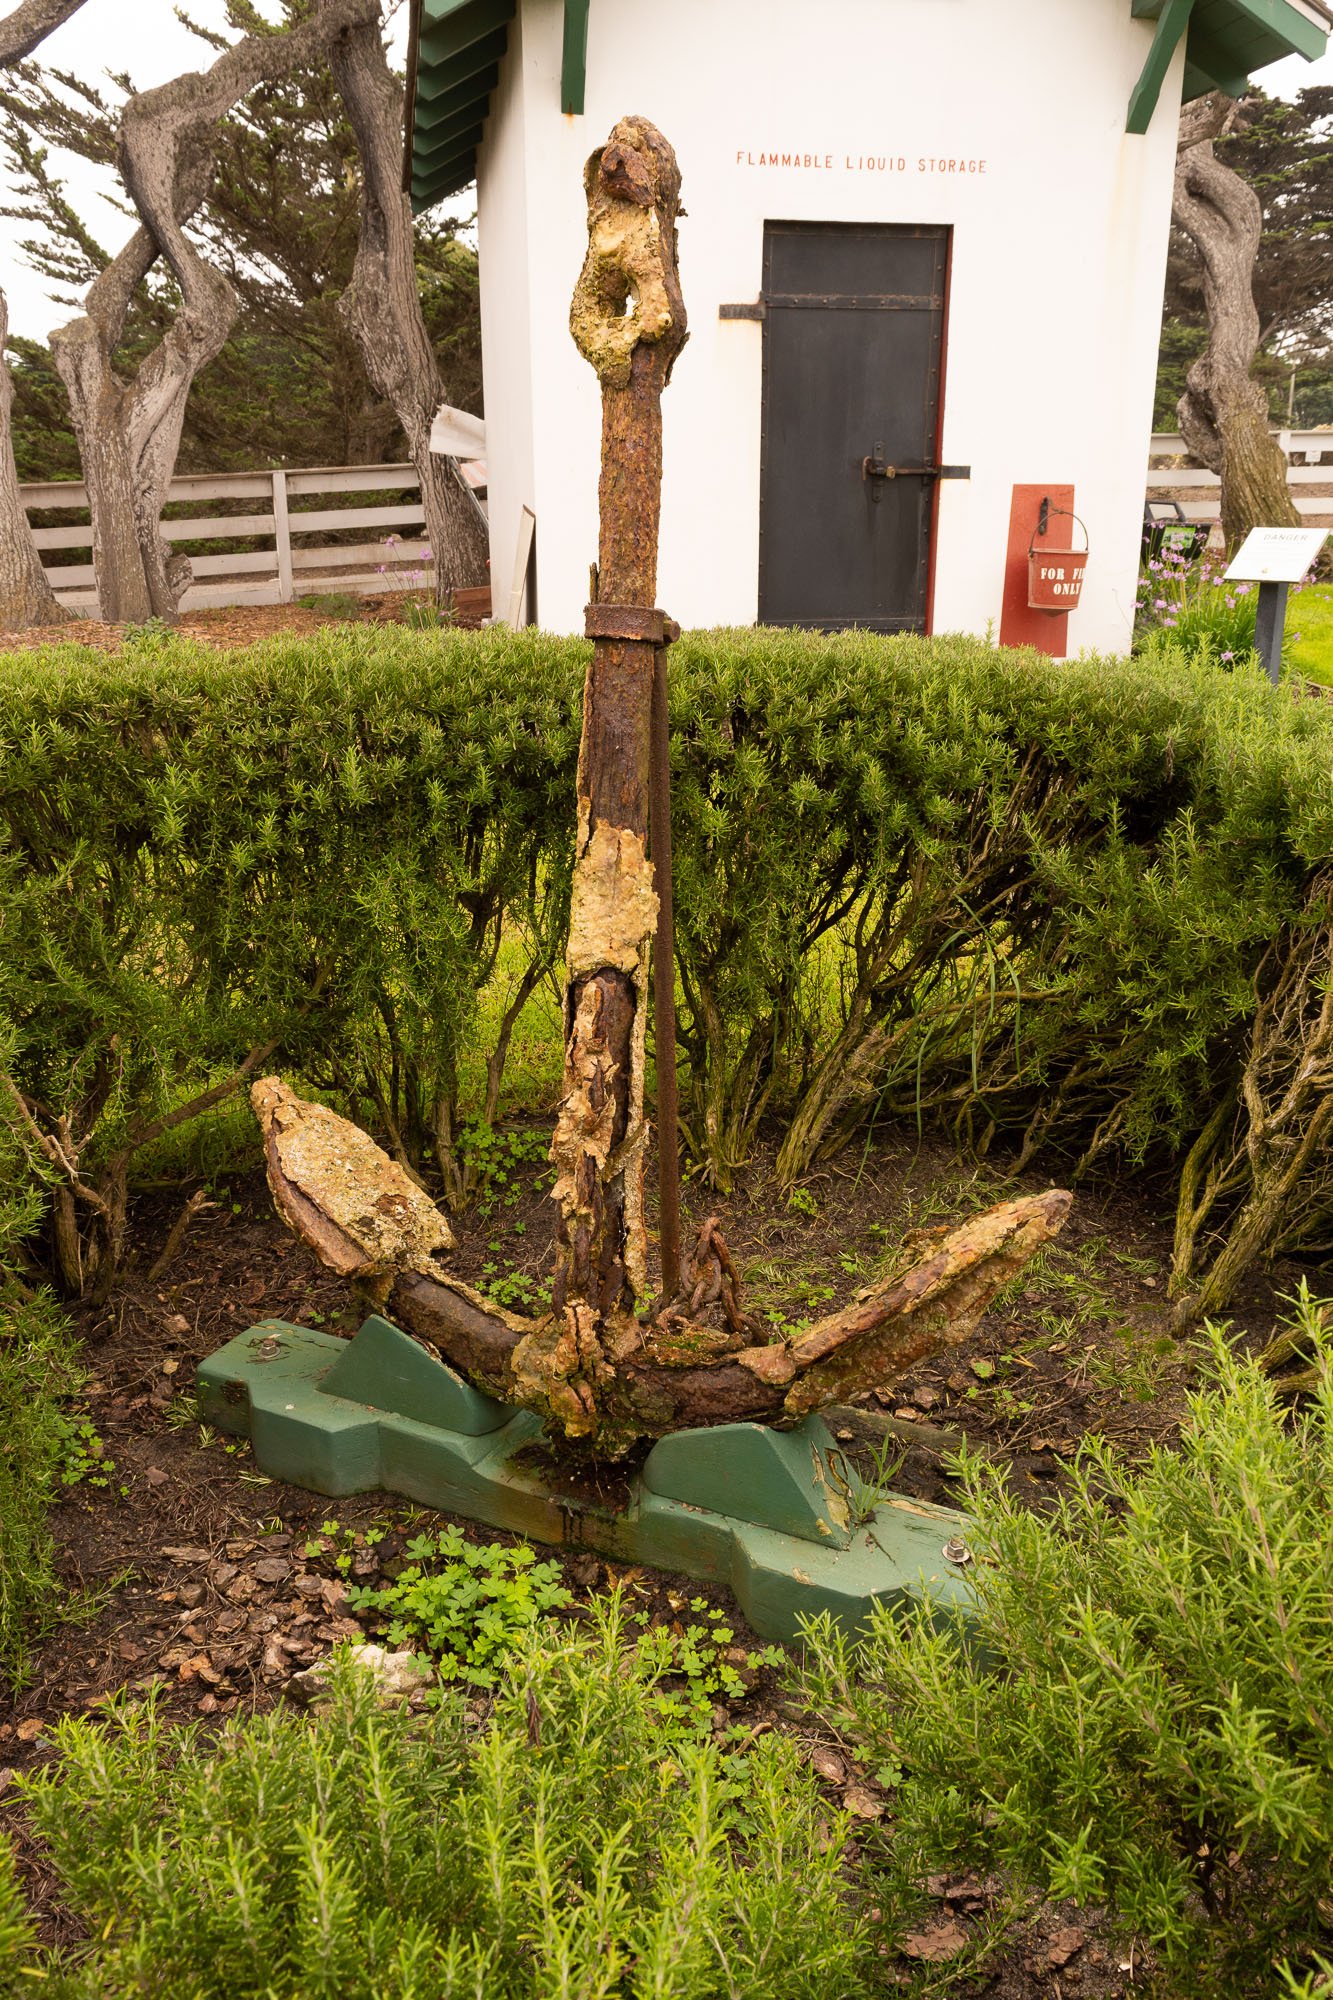 The ocean depths have done their thing on this anchor recovered from a shipwreck.